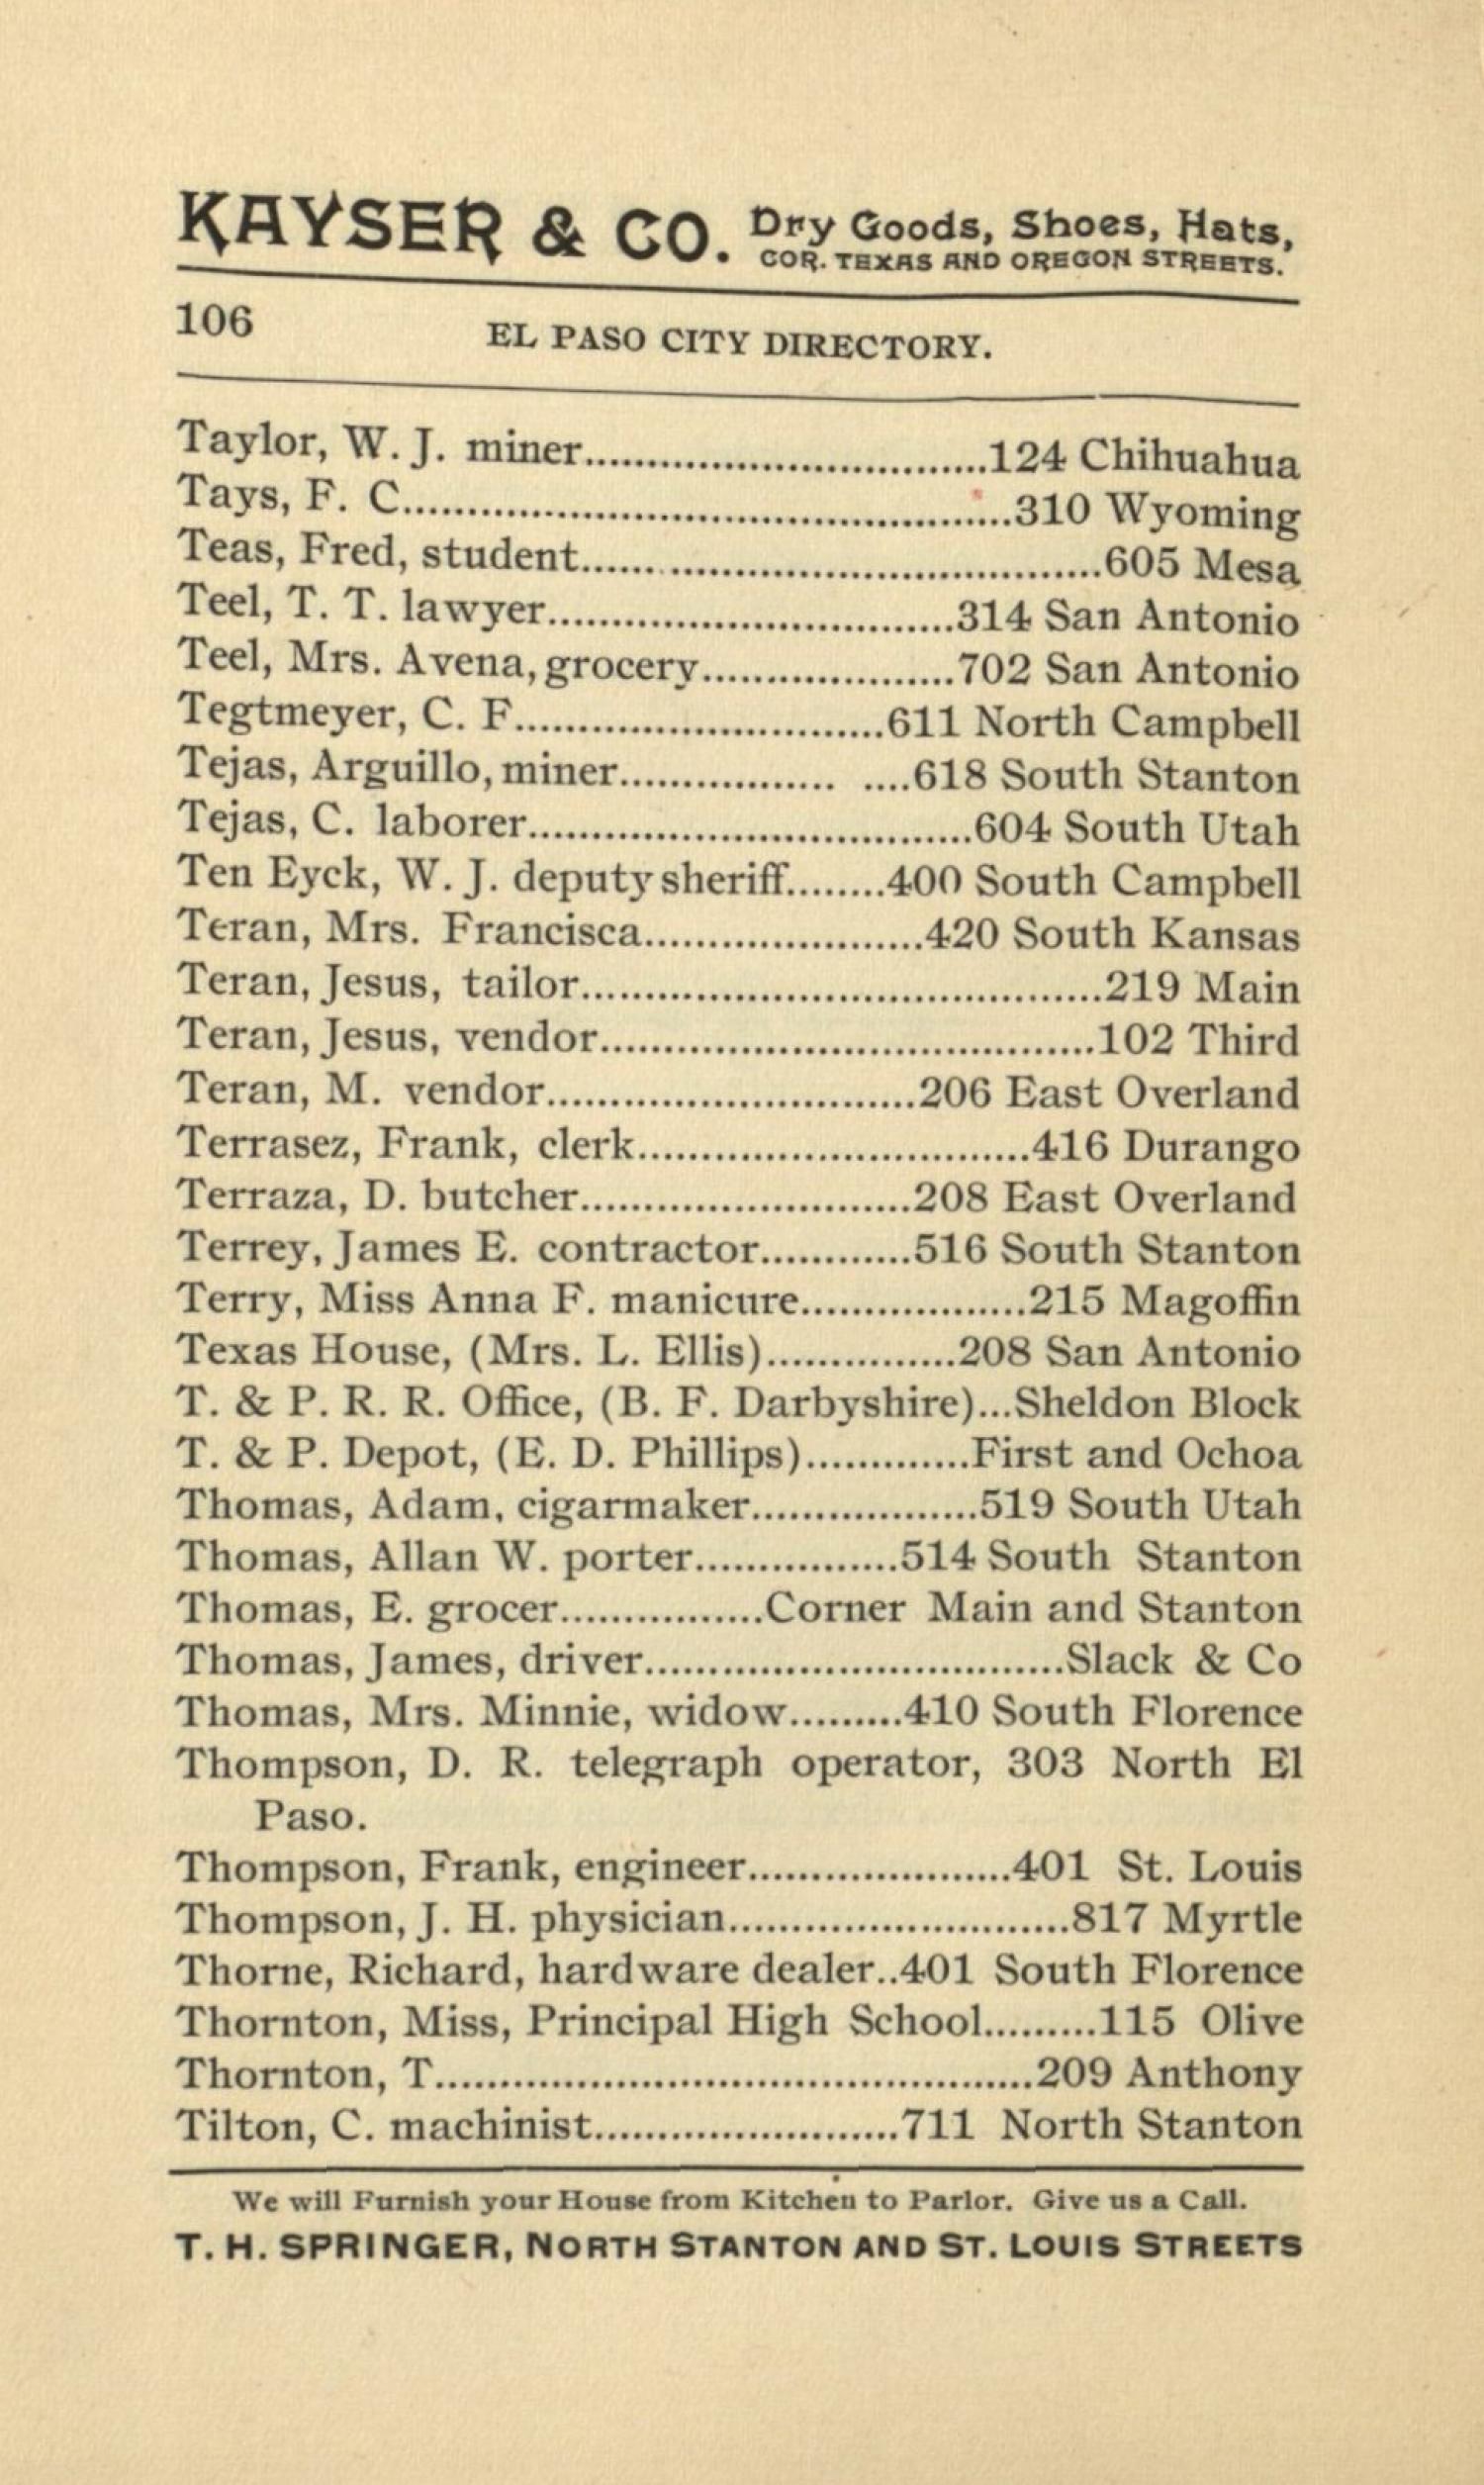 El Paso City Directory for the Years 1895 - 1896
                                                
                                                    106
                                                